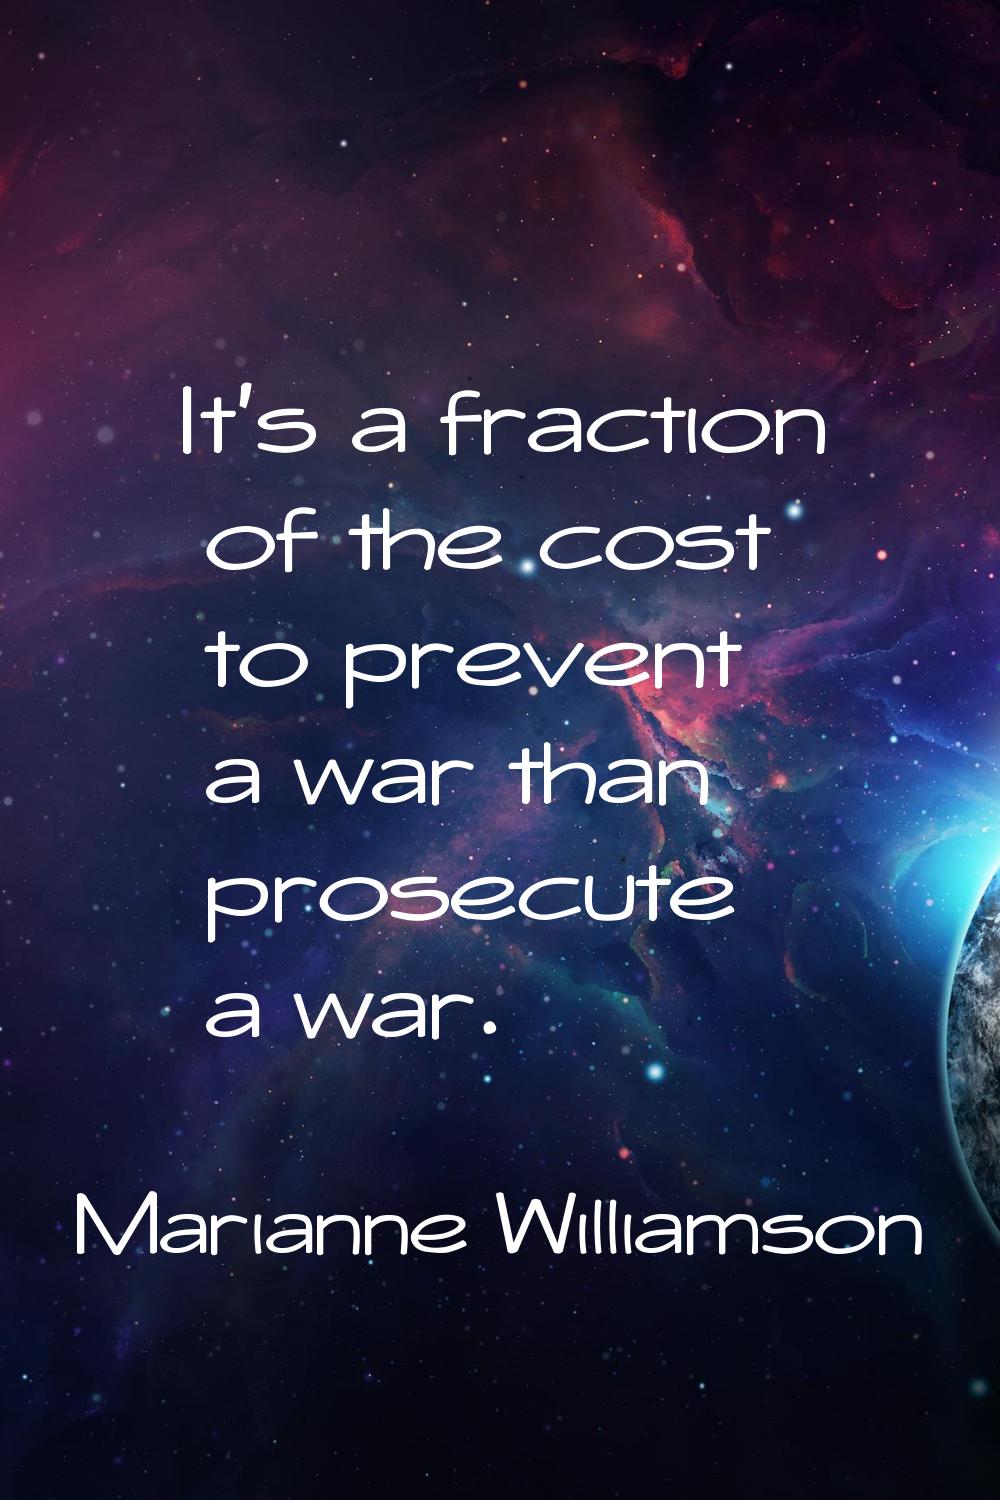 It's a fraction of the cost to prevent a war than prosecute a war.